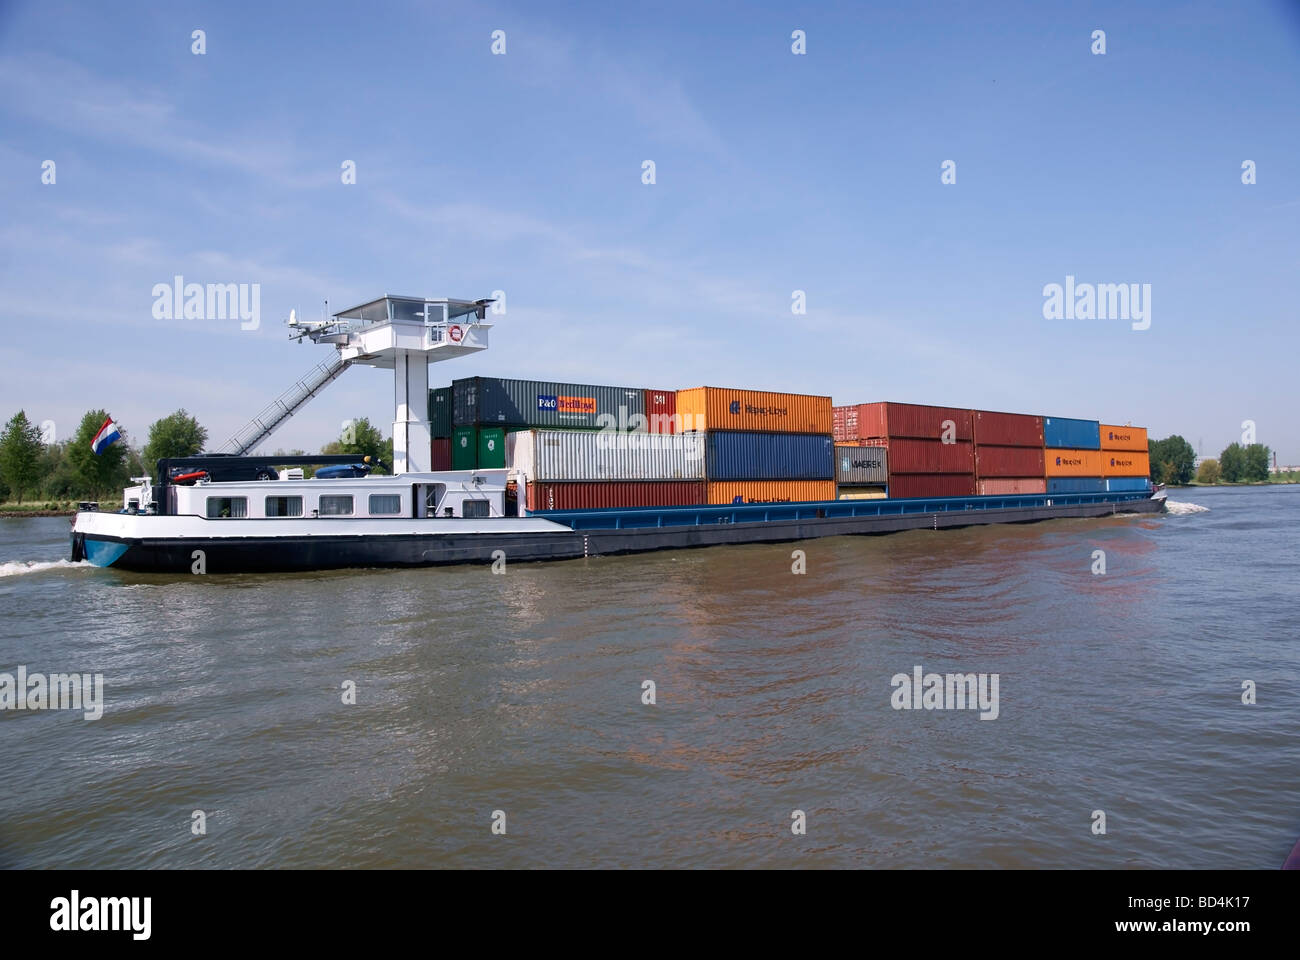 Container barge on the Dordtse Kil waterway Stock Photo